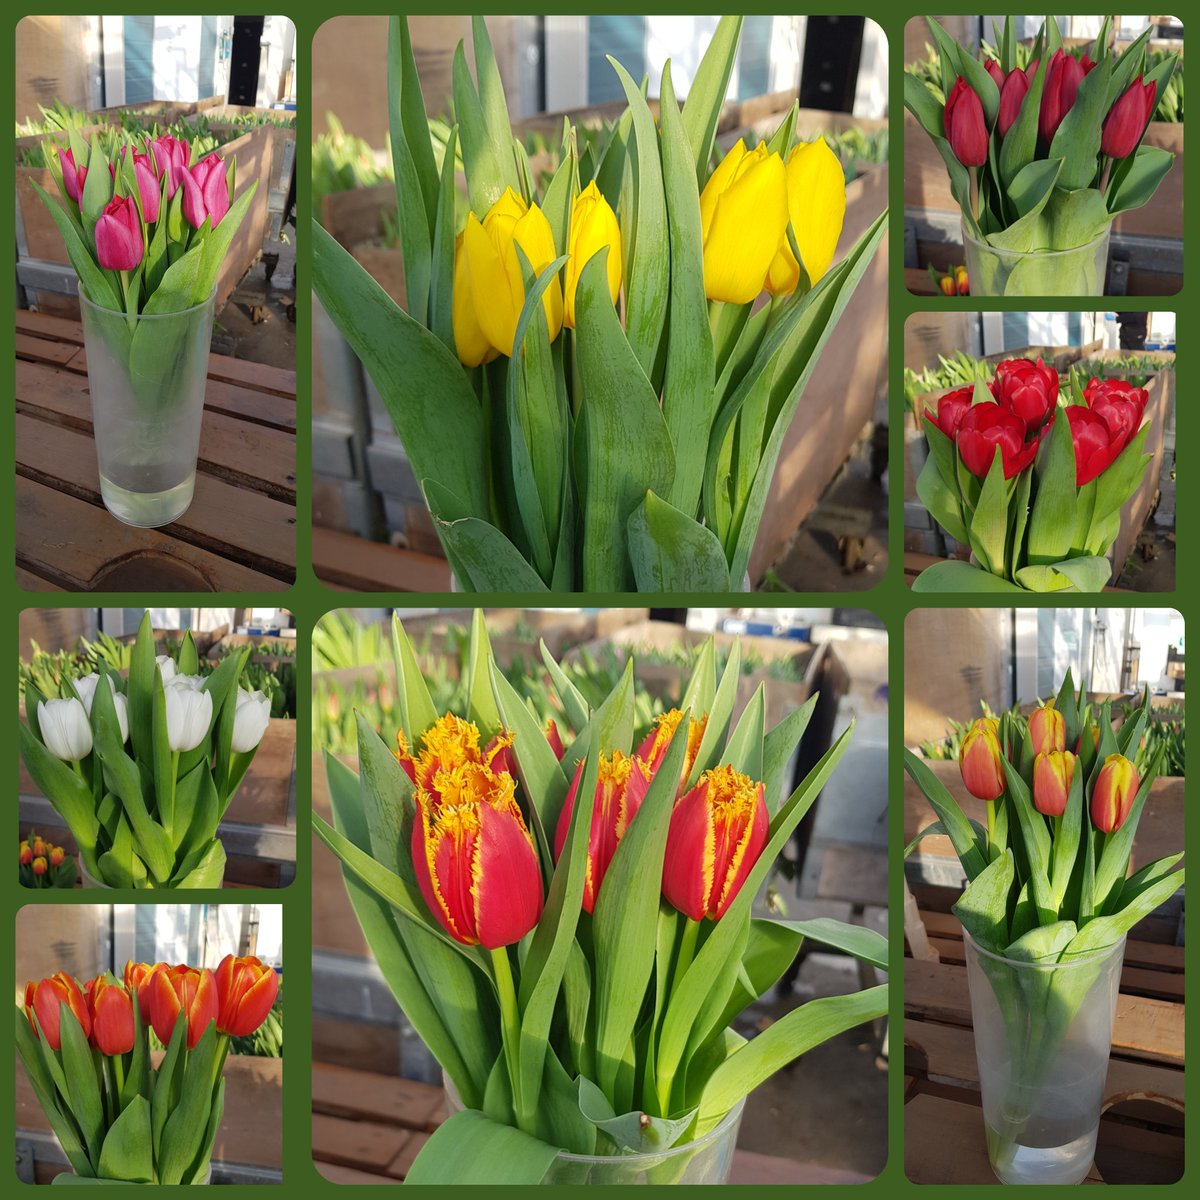 A few of this week's varieties including some trials. Now on the run in to #MothersDay, volumes building daily. #Britishflowers #Lovebritishtulips